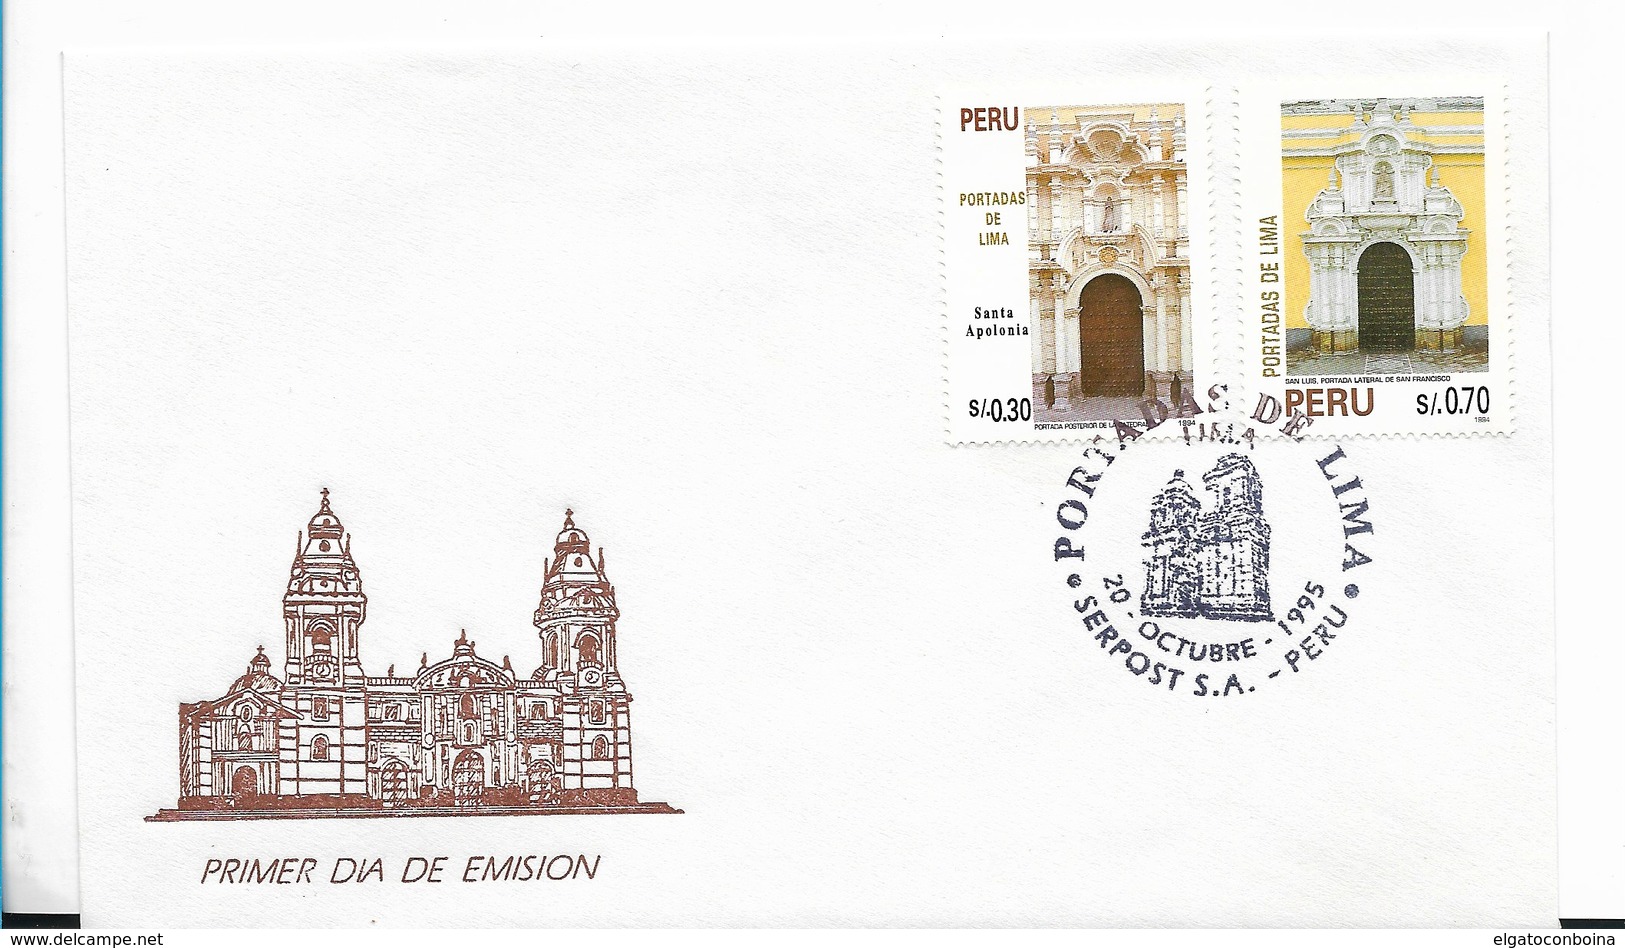 PERU 1995 Lima Cathedrals Architecture Buildings FDC First Day Cover Scott 1119-20 - Pérou